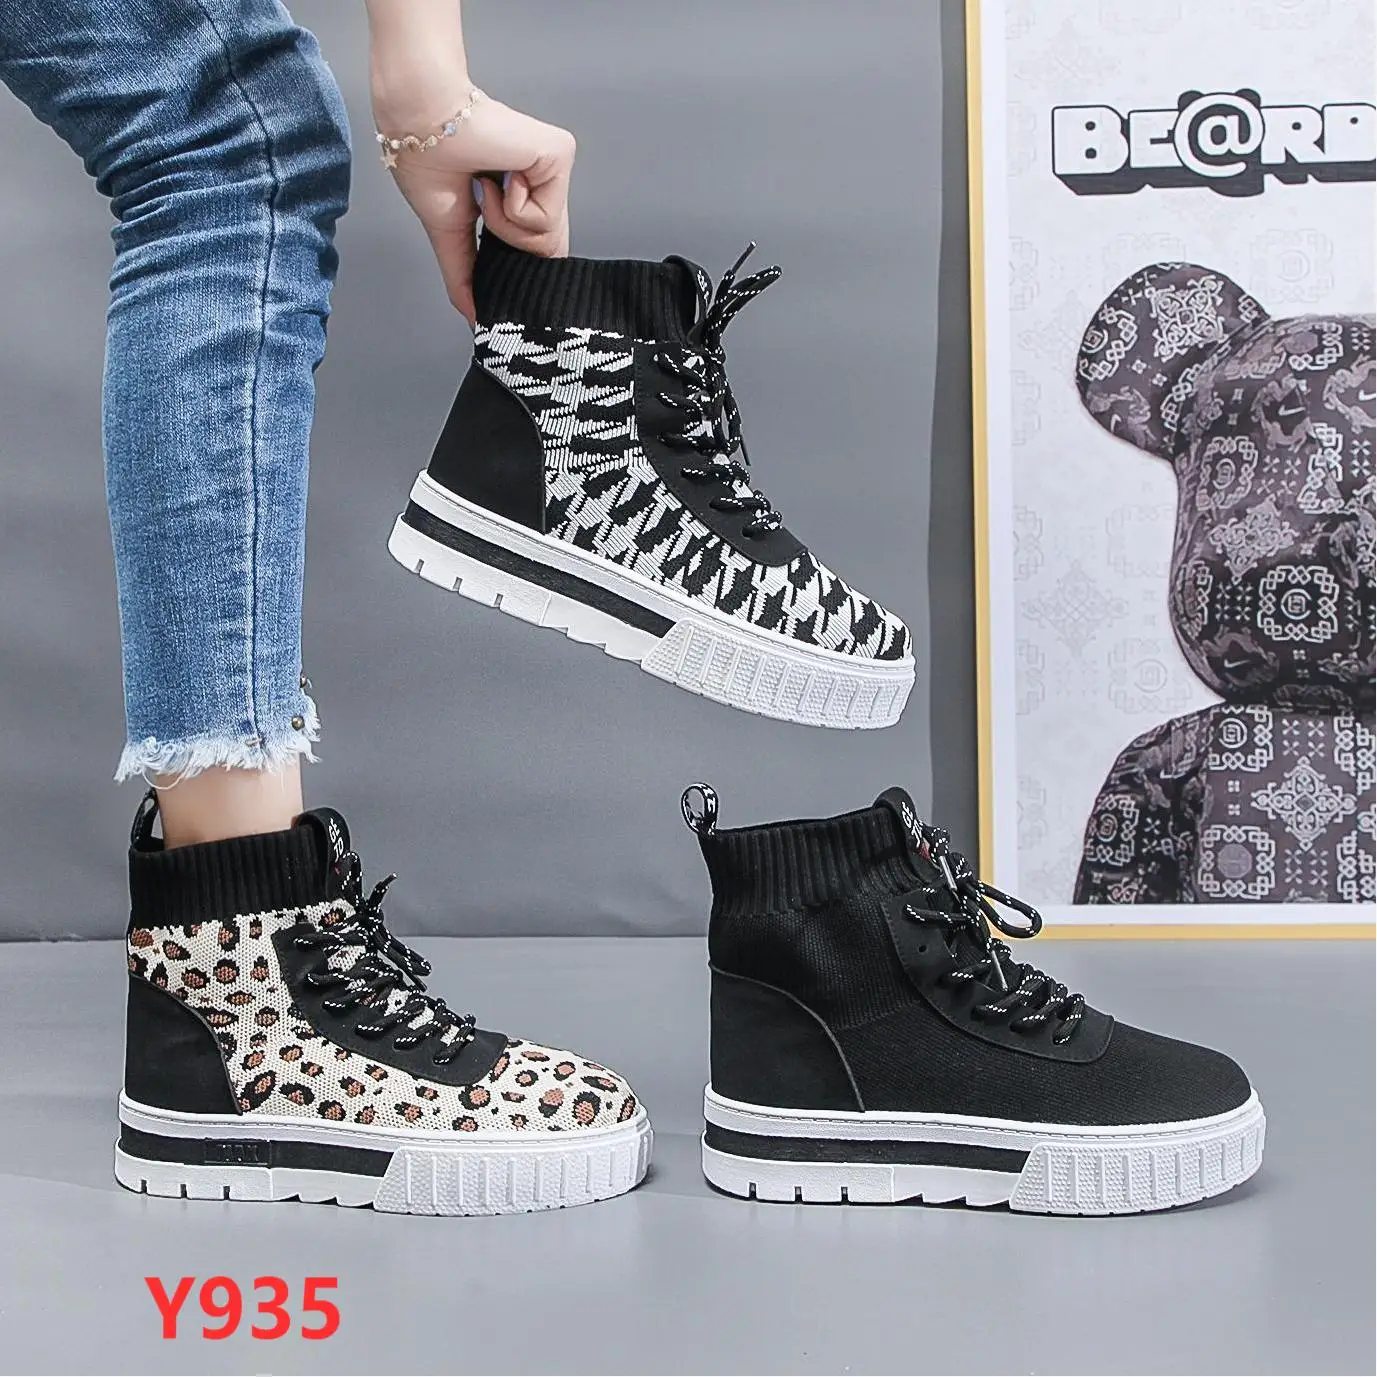 2022 Suede Pantshoes Shoes Metal chain Running Sneakers Girls Lace Up PU Fashion Casual shoes